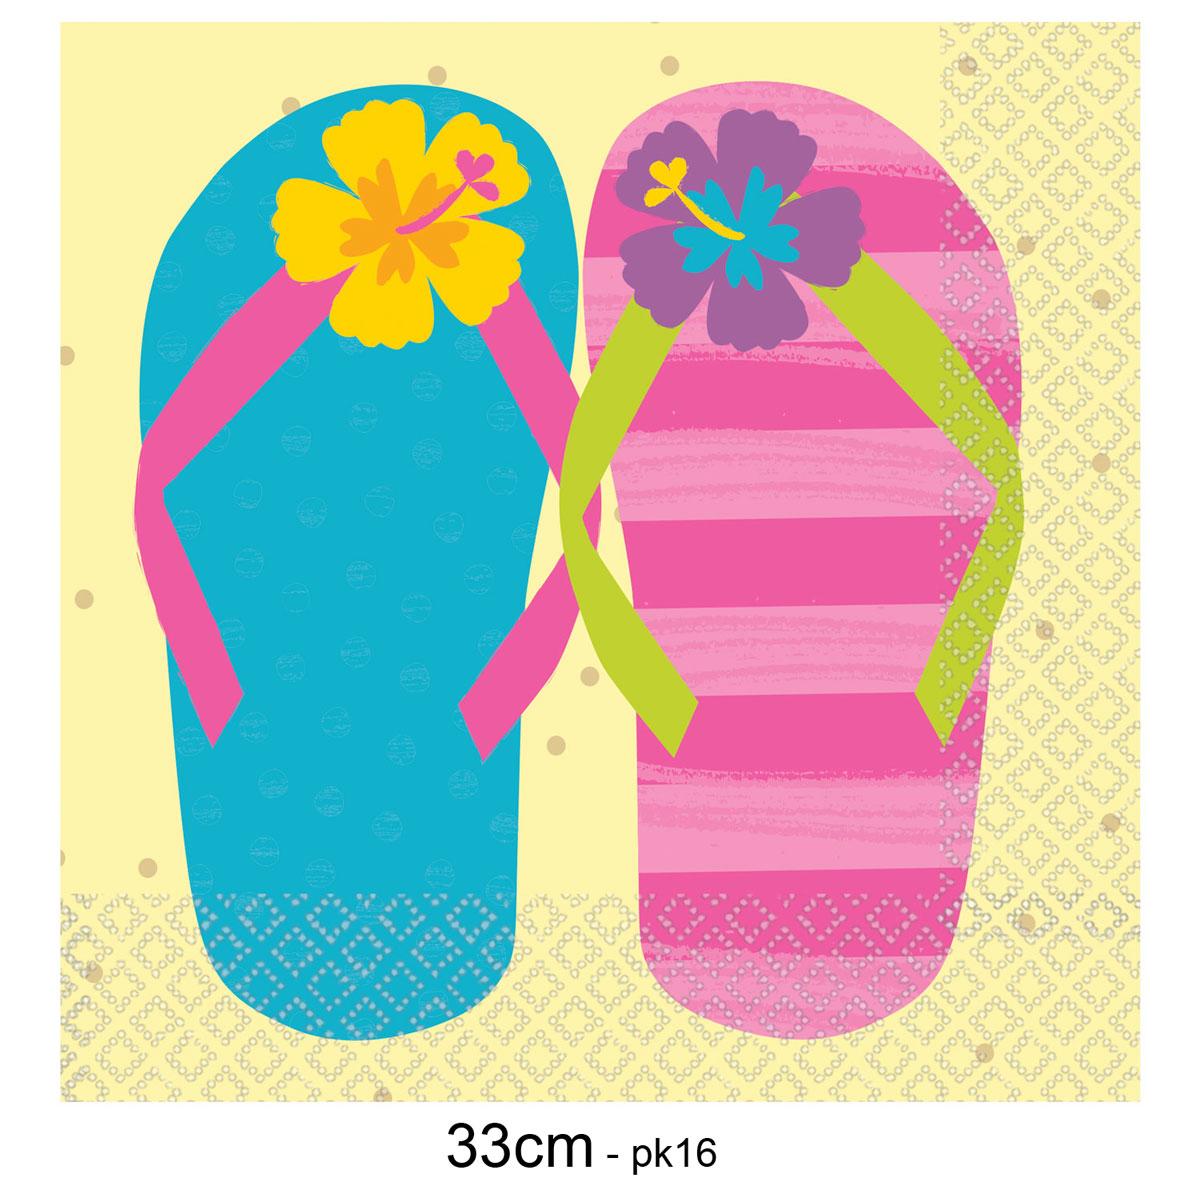 Just Chillin Flip Flop Luncheon Napkins pk16 33cm size by Amscan 9905103 available here at Karnival Costumes online party shop